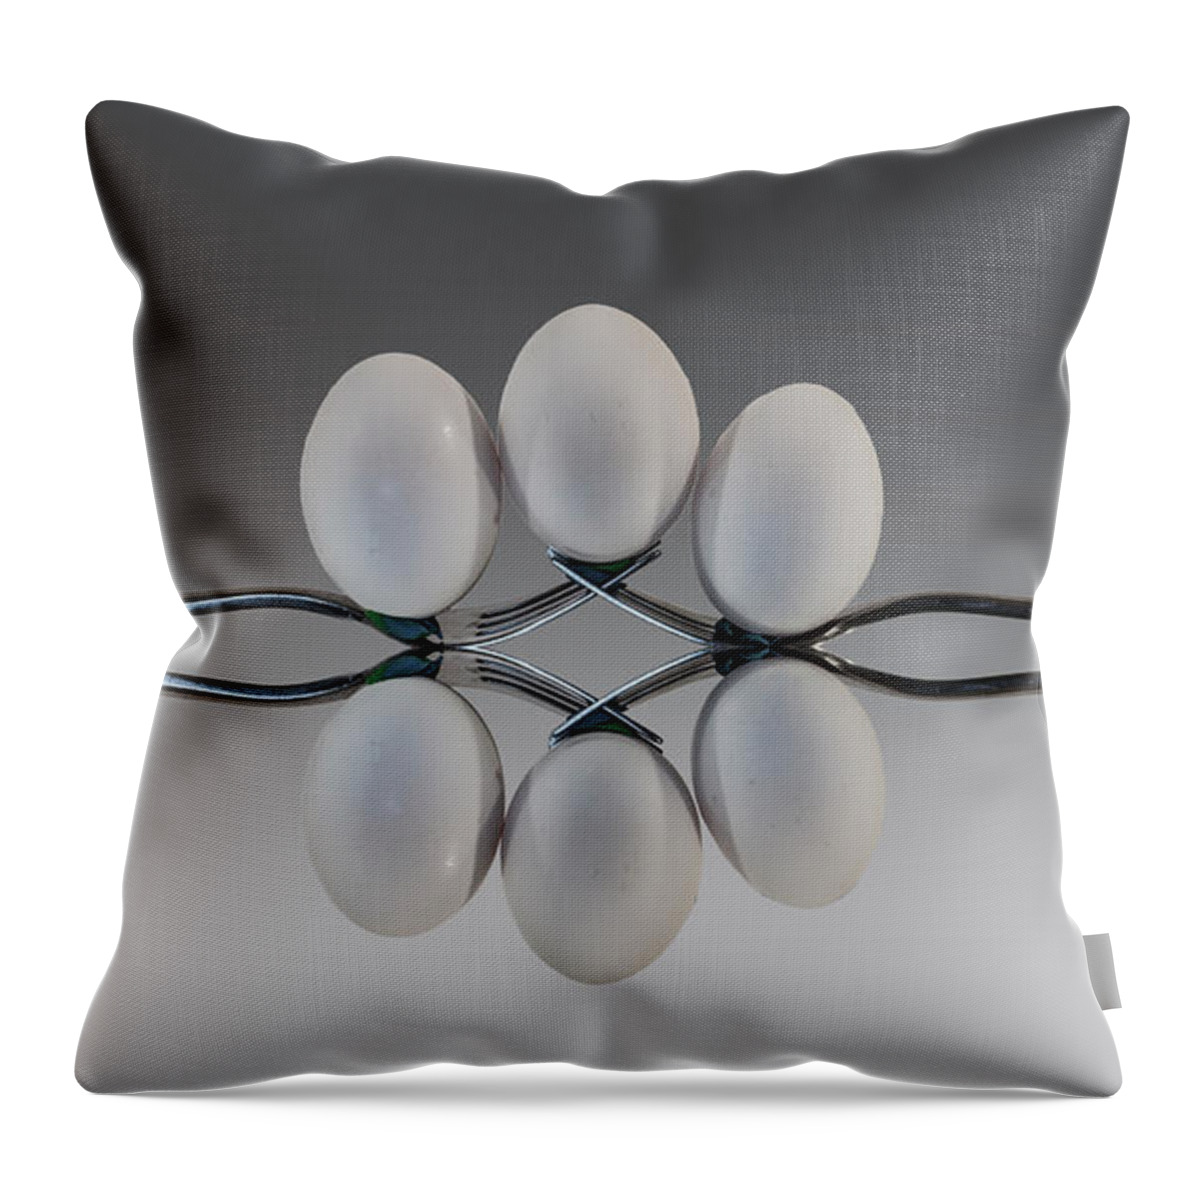 Eggs Throw Pillow featuring the photograph Egg Balance by Shirley Mangini